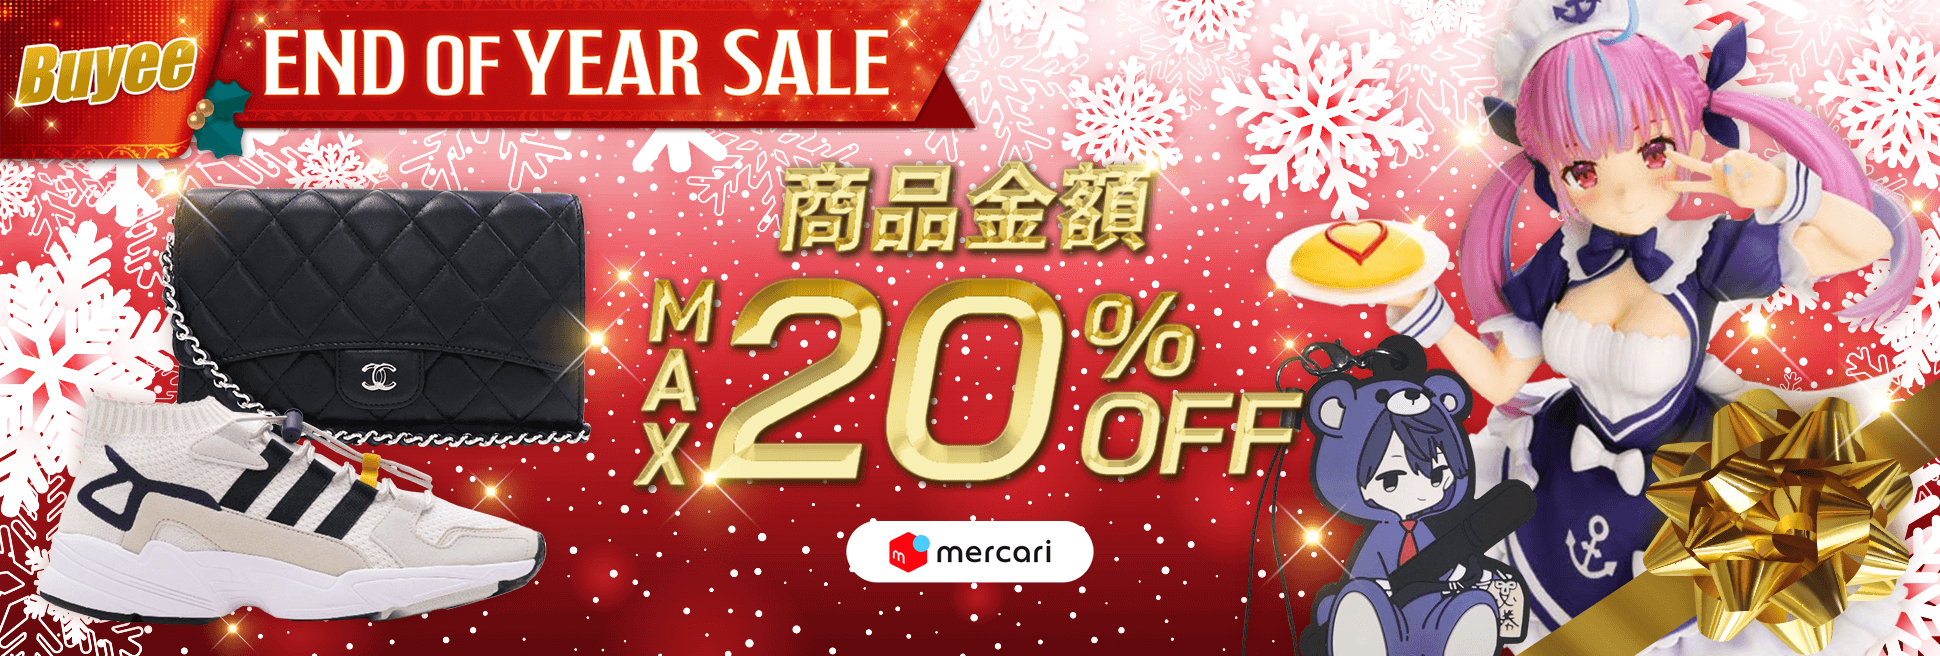 Buyee End of Year Sale! 商品金額MAX 20％OFF タイムセールクーポン配布中！